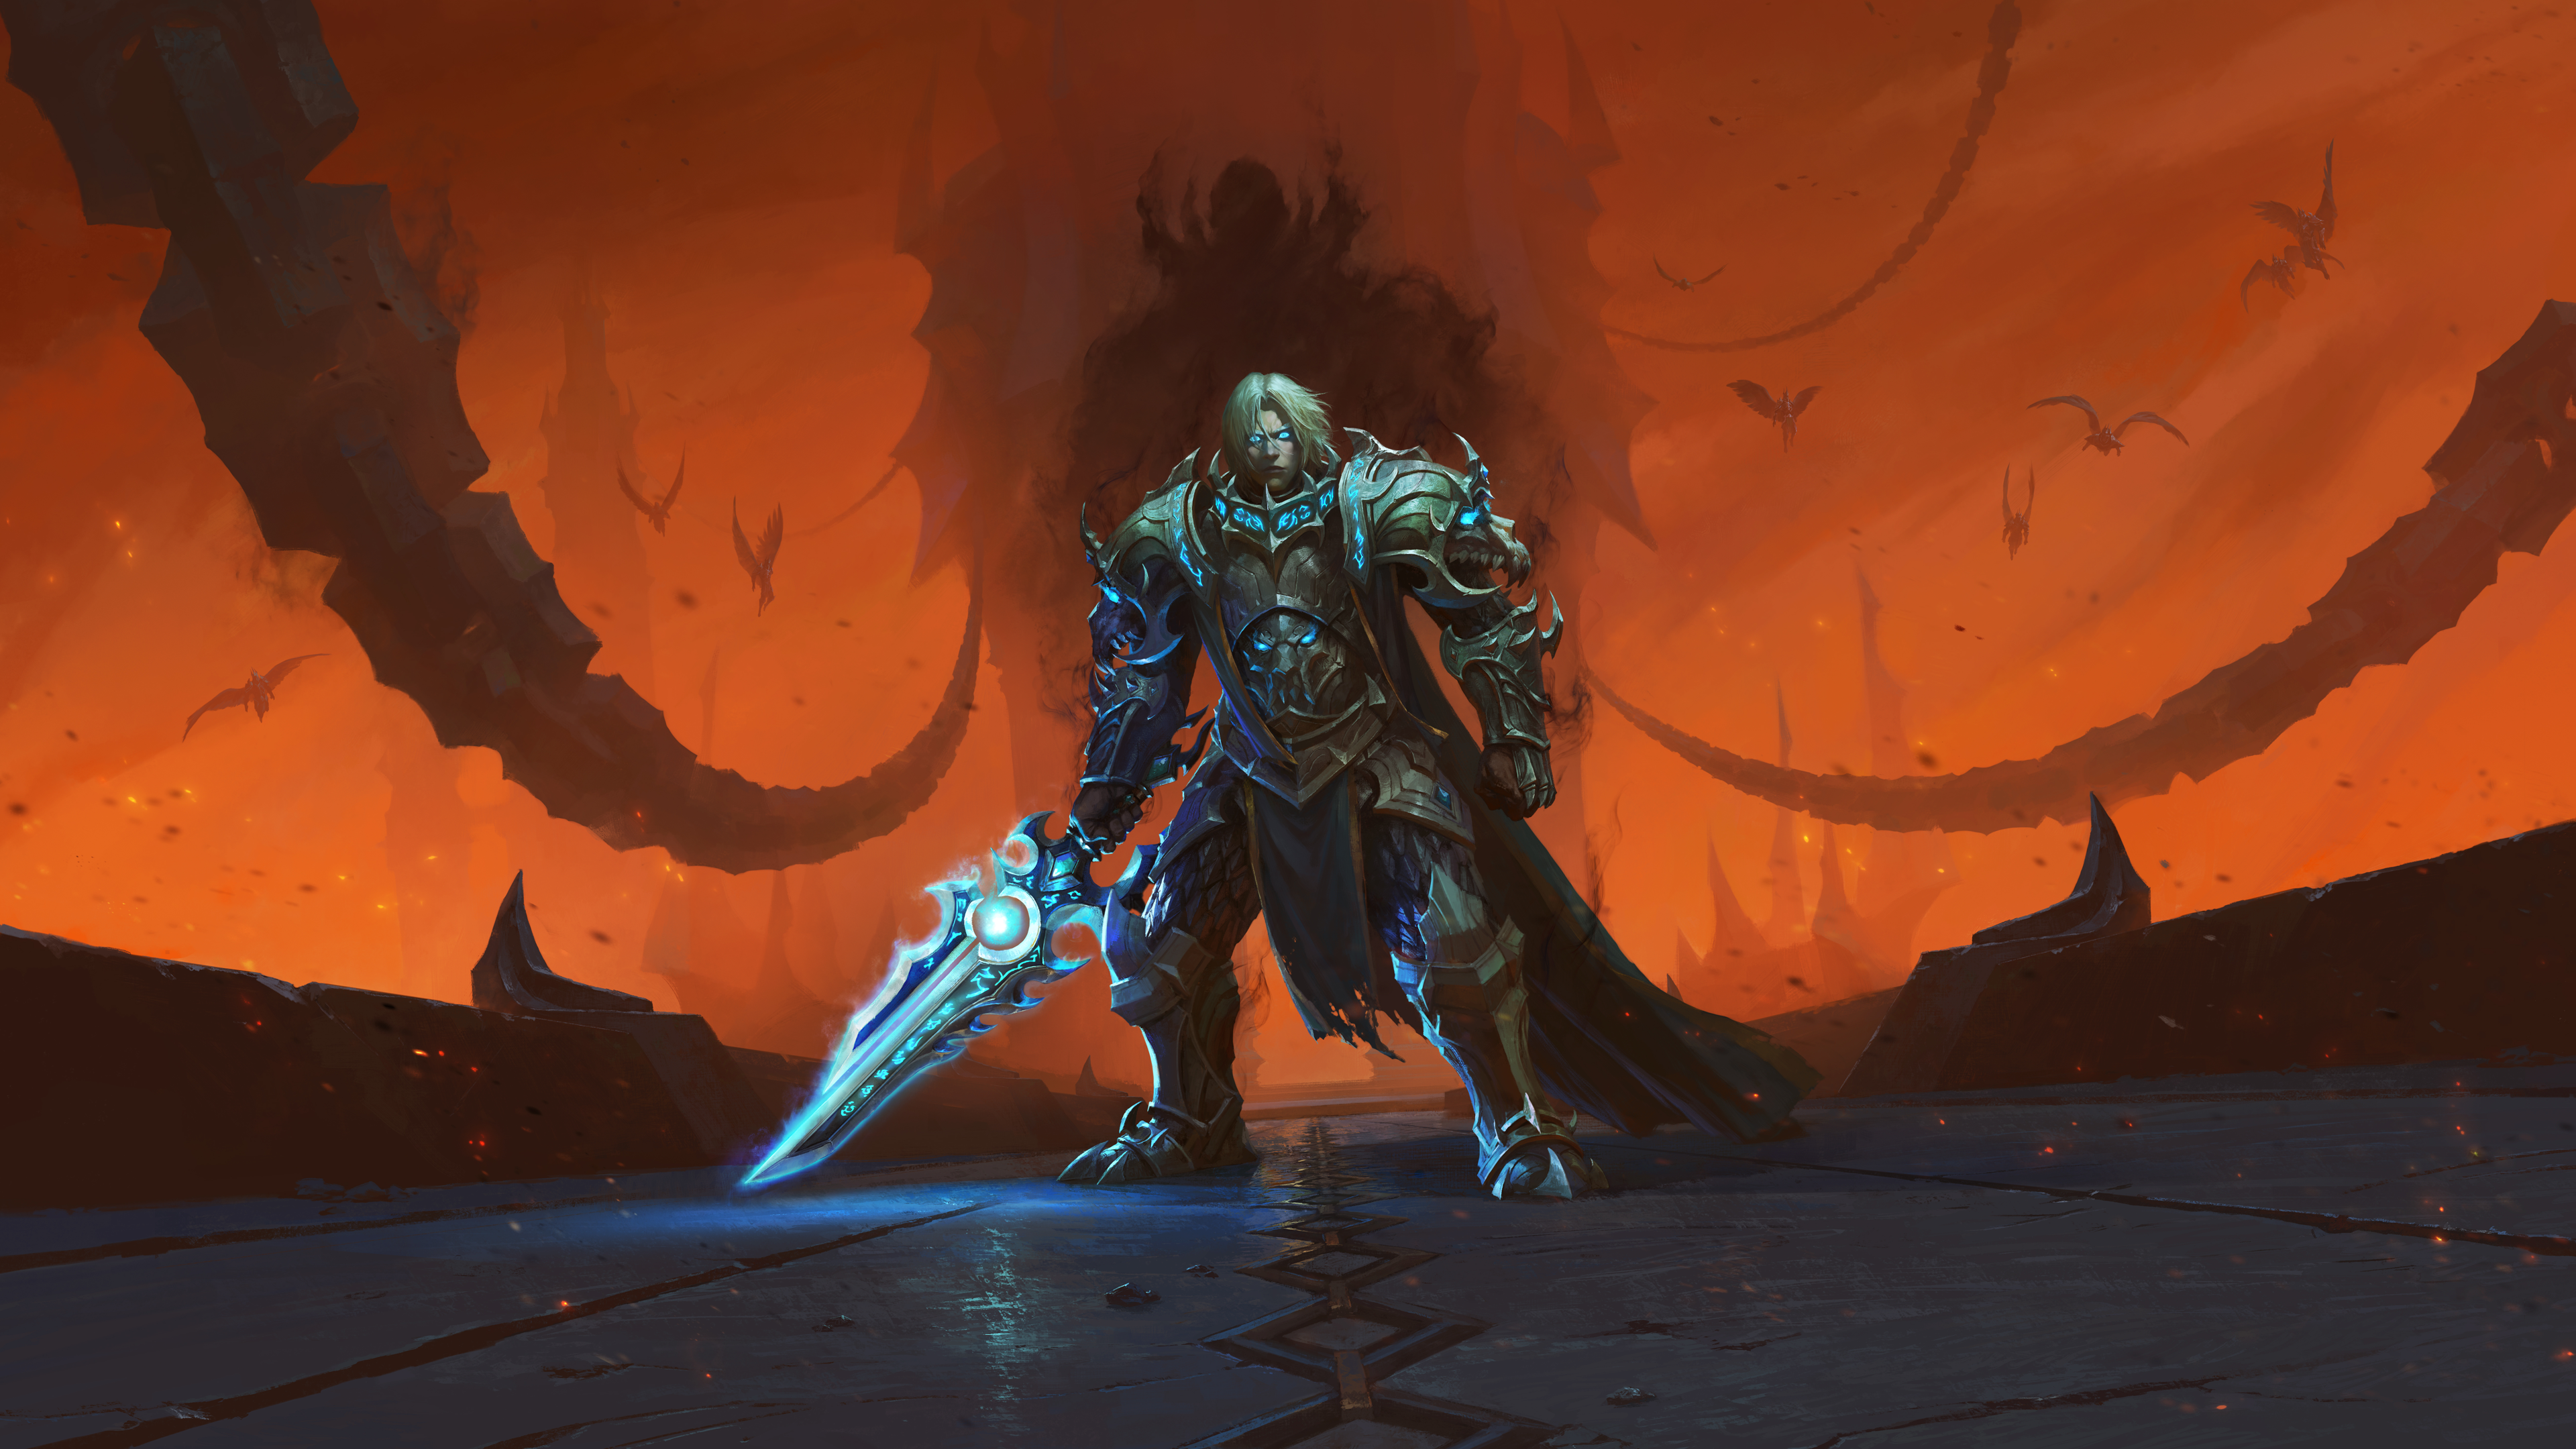 General 3840x2160 World of Warcraft World of Warcraft: Shadowlands Anduin Wrynn paladin Death Knight Blizzard Entertainment video games video game characters